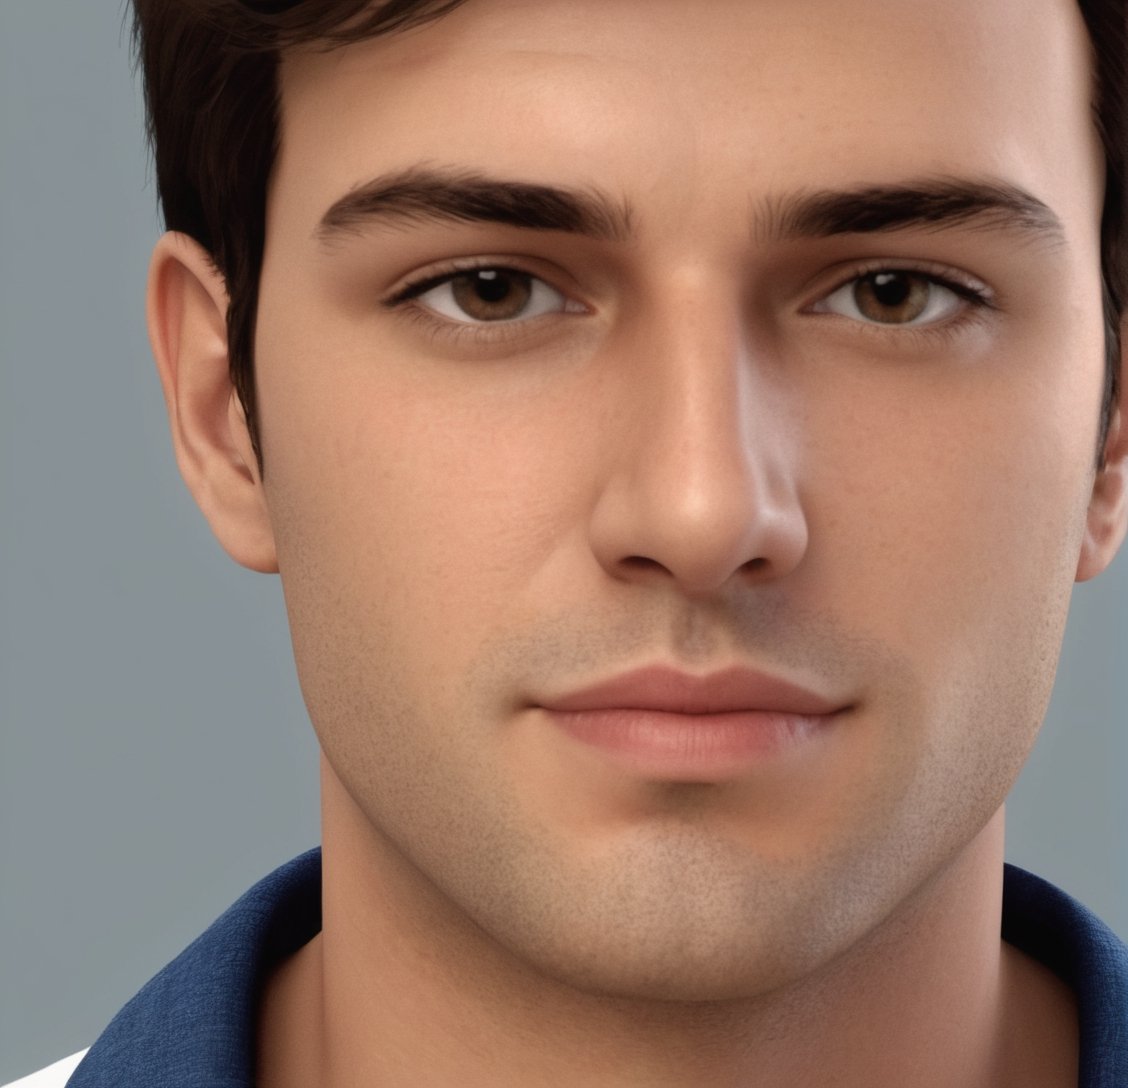 Generate a 3D model to use in AI of a Spanish man with brown hair and eyes and white skin, with slight circles under his eyes based on these links, face the same as the one in the links:
https://www.facebook.com/photo/?fbid=7222619341193542&set=a.7222620204526789, https://www.facebook.com/photo/?fbid=7222619391193537&set=a.7222620204526789, https://www.facebook.com/photo/?fbid=7222619424526867&set=a.7222620204526789, https://www.facebook.com/photo/?fbid=7222619274526882&set=a.7222620204526789, https://www.facebook.com/photo/?fbid=7222617957860347&set=a.7222620204526789, https://www.facebook.com/photo/?fbid=7222619187860224&set=a.7222620204526789, https://www.facebook.com/photo/?fbid=7222618941193582&set=a.7222620204526789, https://www.facebook.com/photo/?fbid=7222619281193548&set=a.7222620204526789